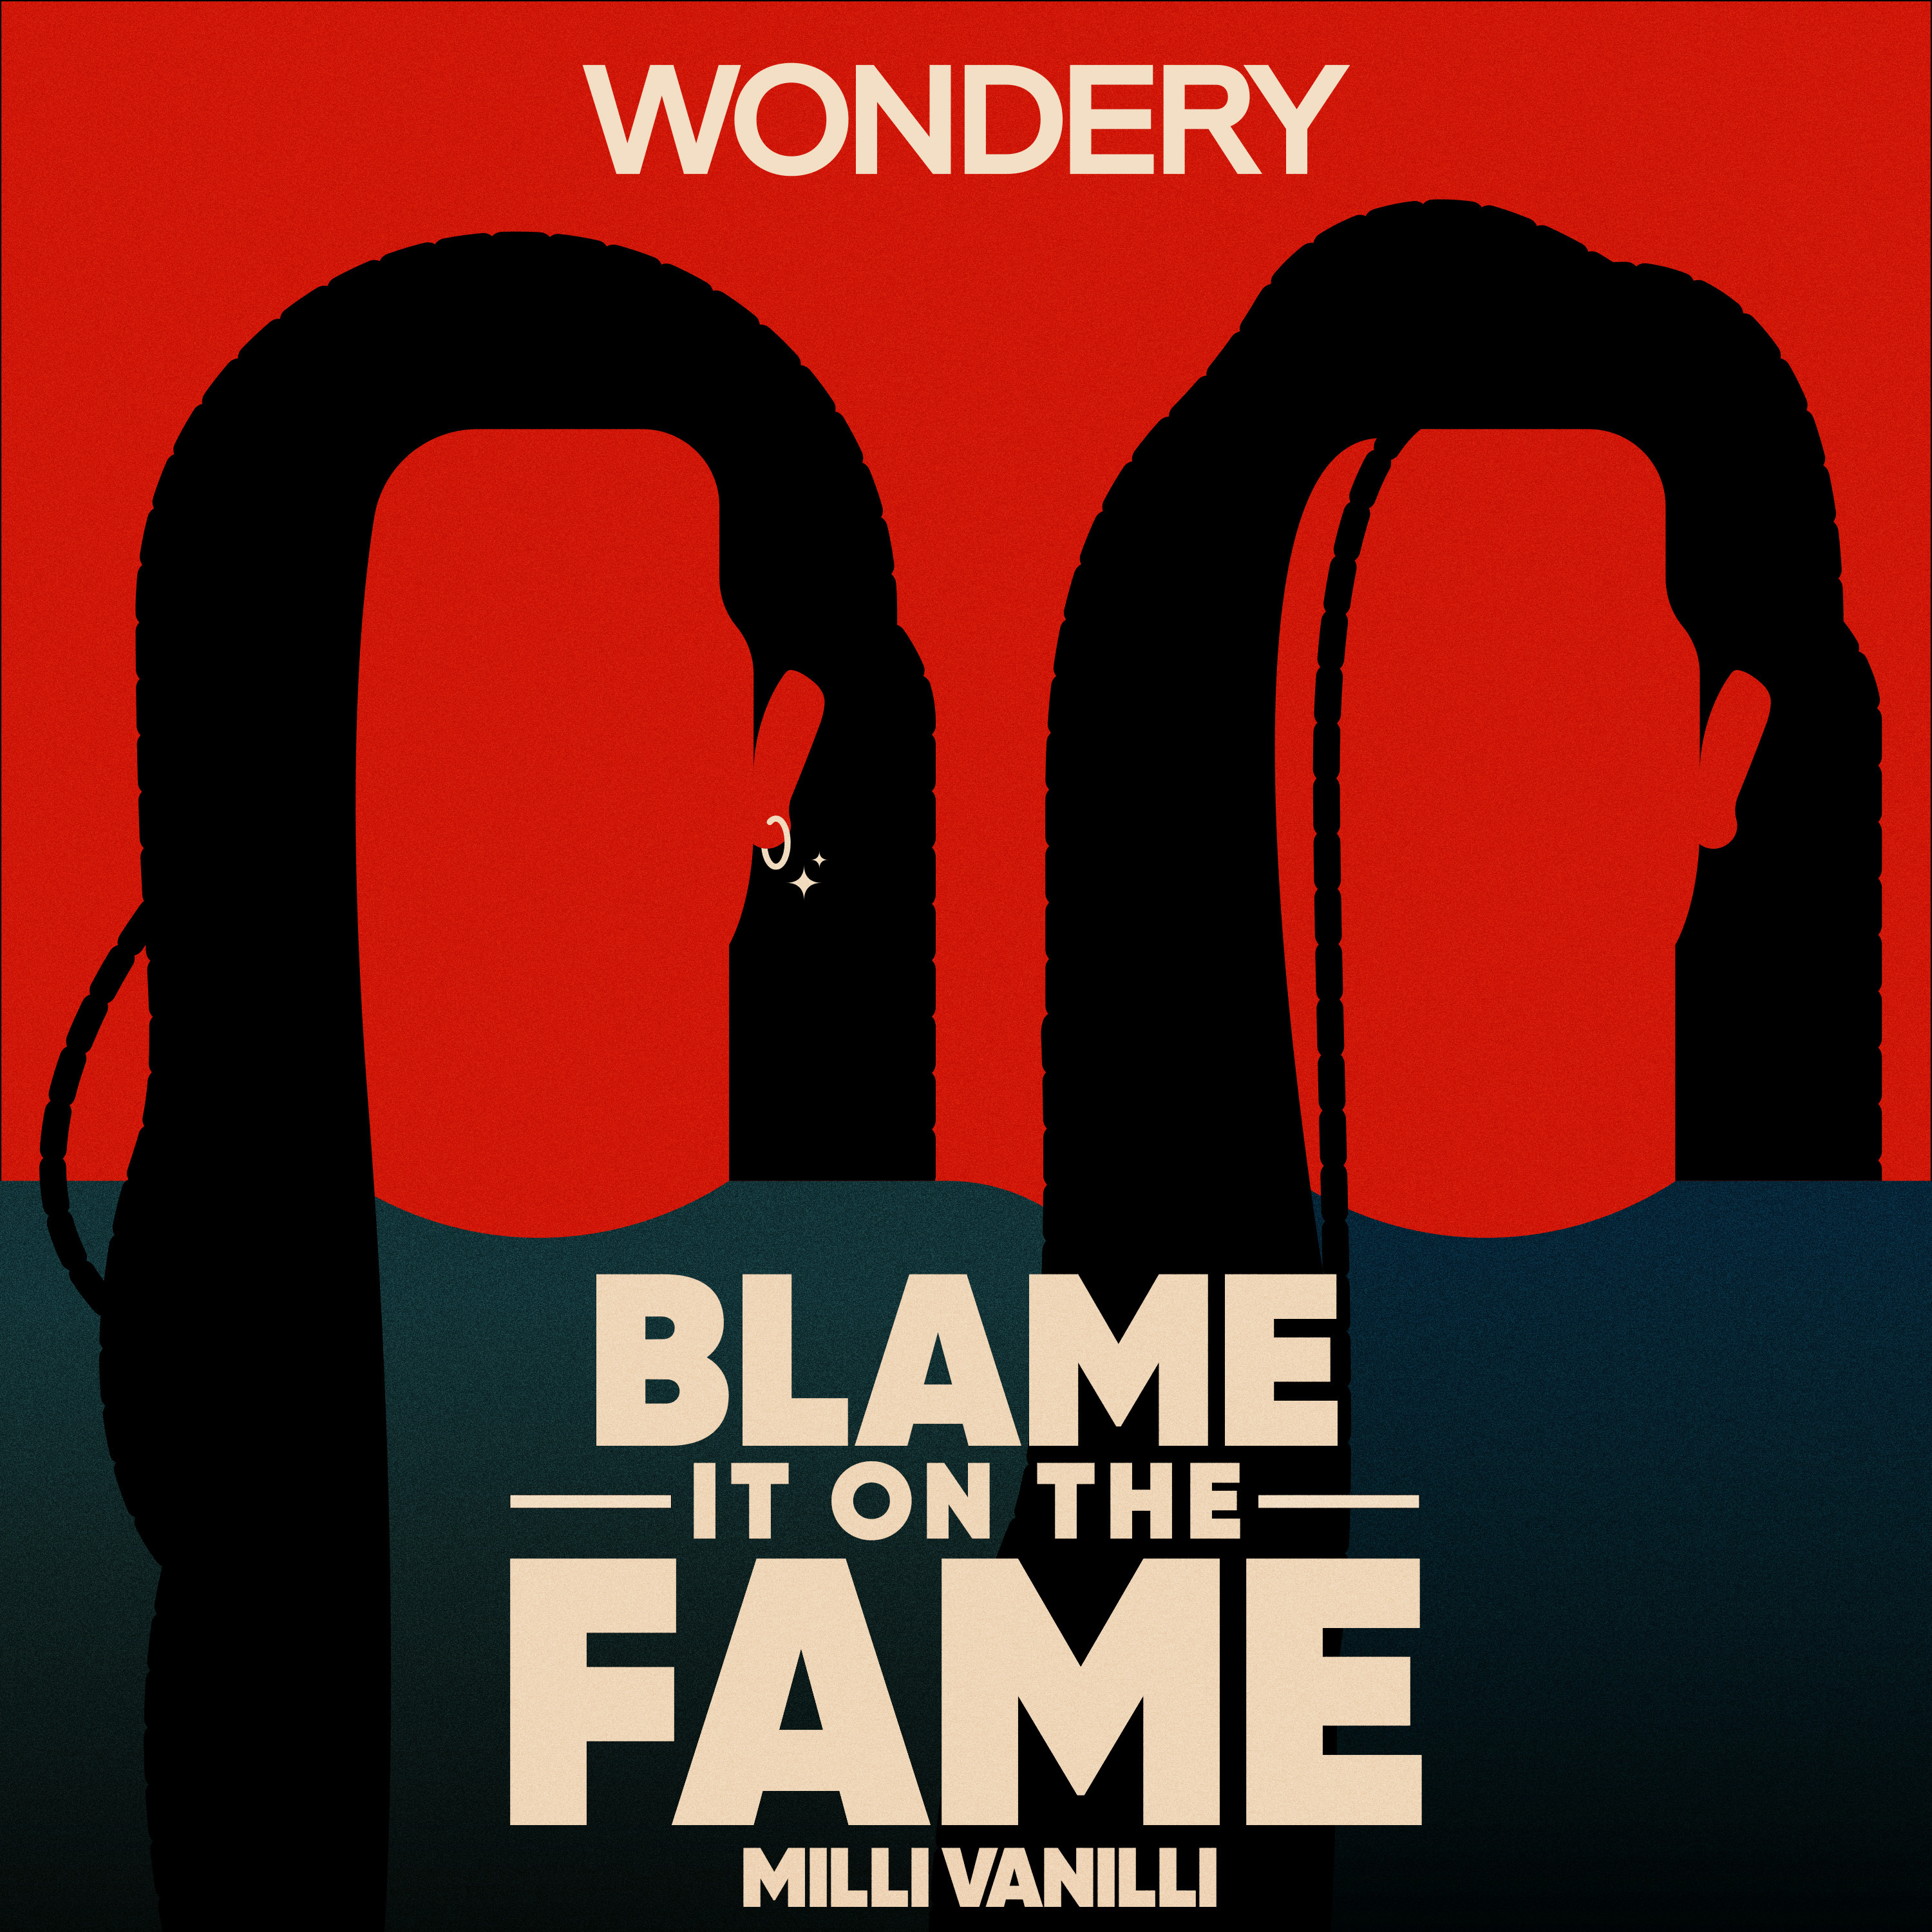 Blame it on the Fame: Milli Vanilli podcast show image